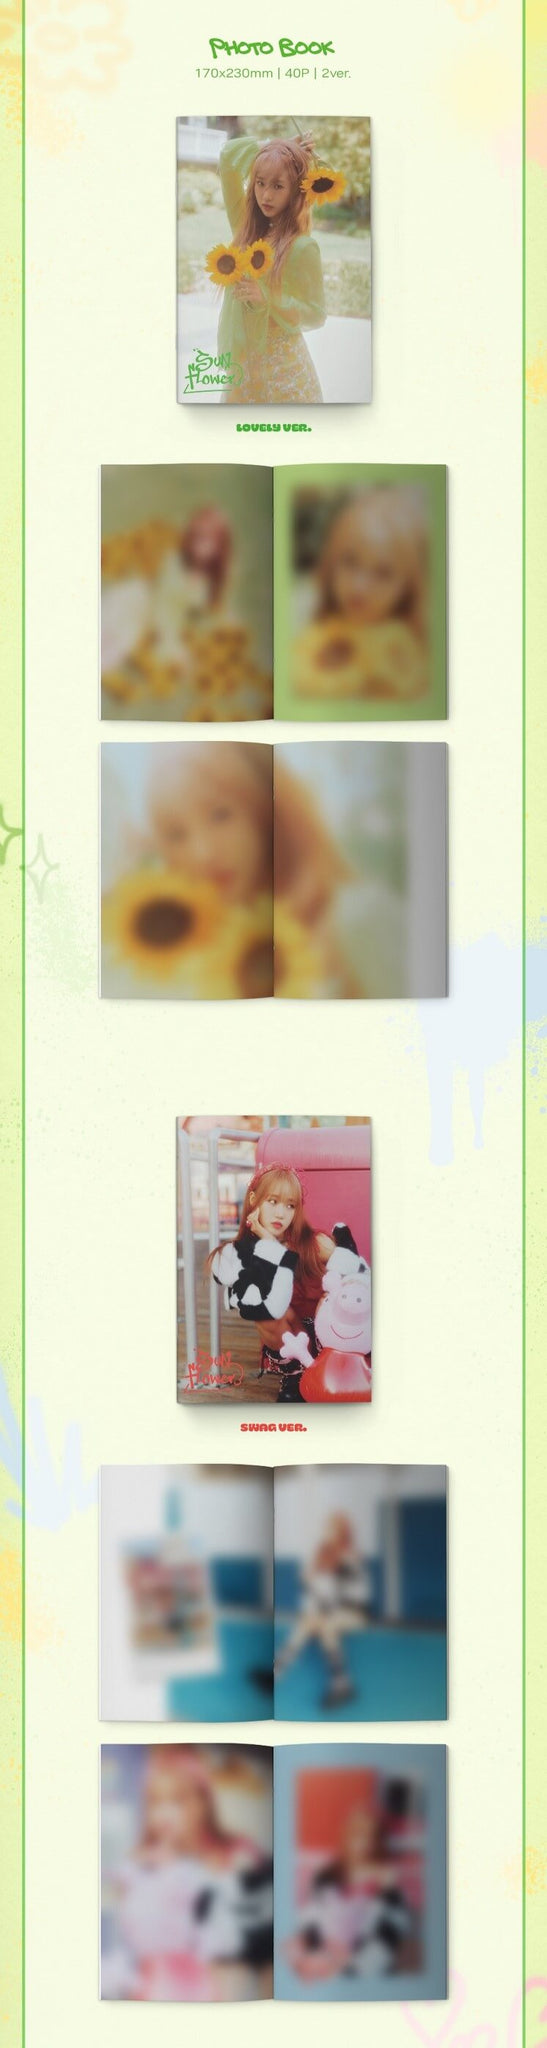 Choi Yoojung Sunflower Lovely + Swag Version Inclusions Photobook